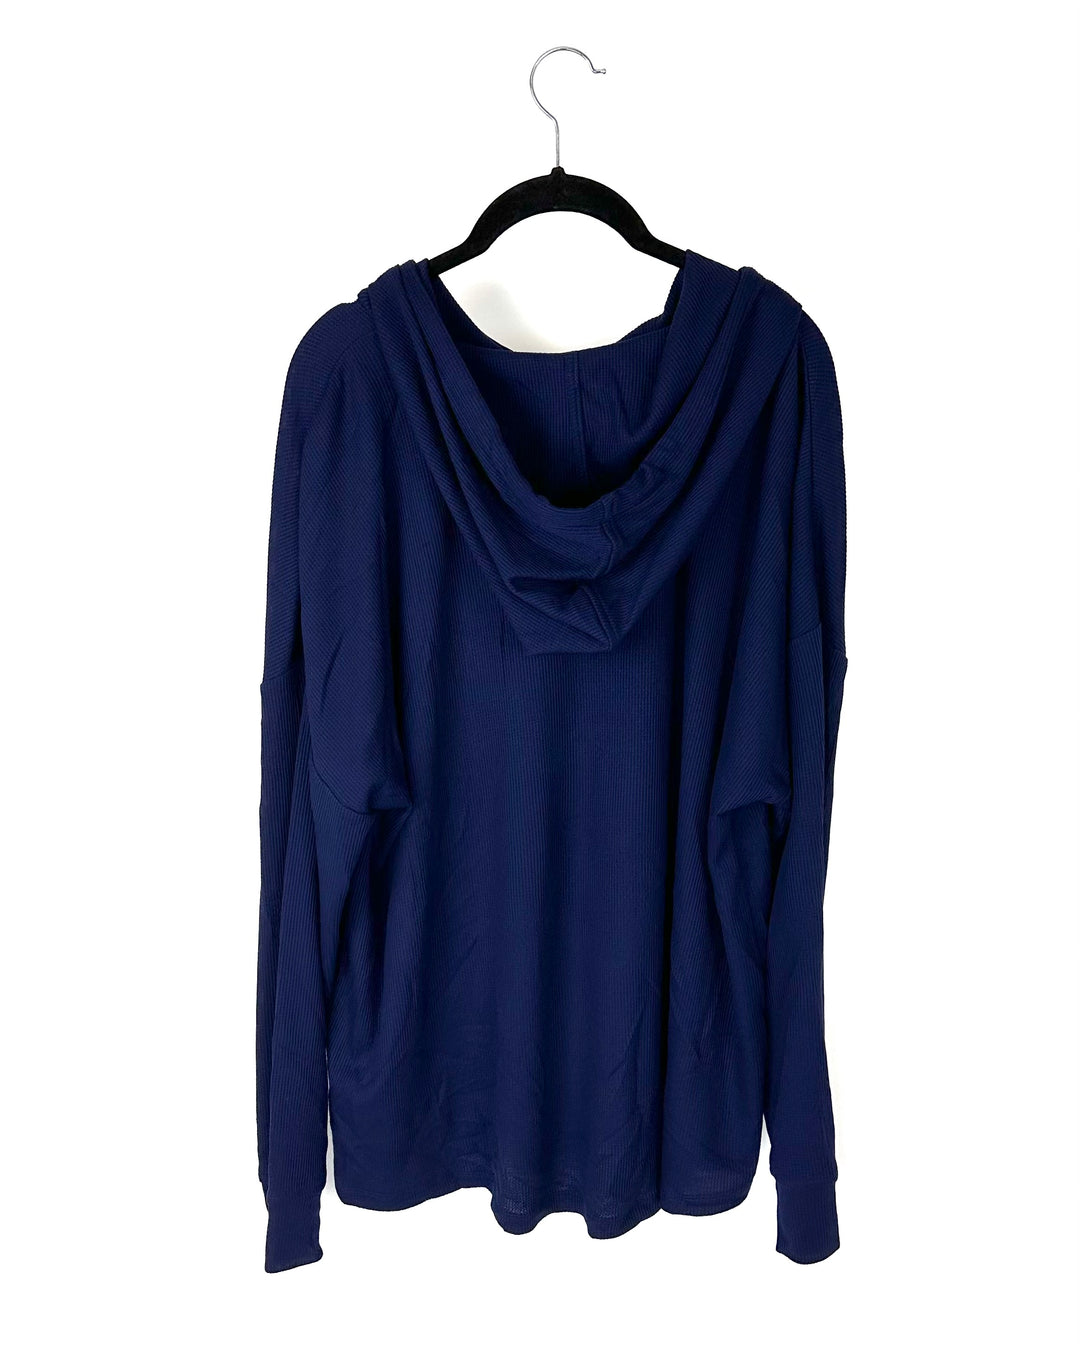 Navy Blue Ribbed Long Sleeve With Hood - Sizes 10-12, 14-16